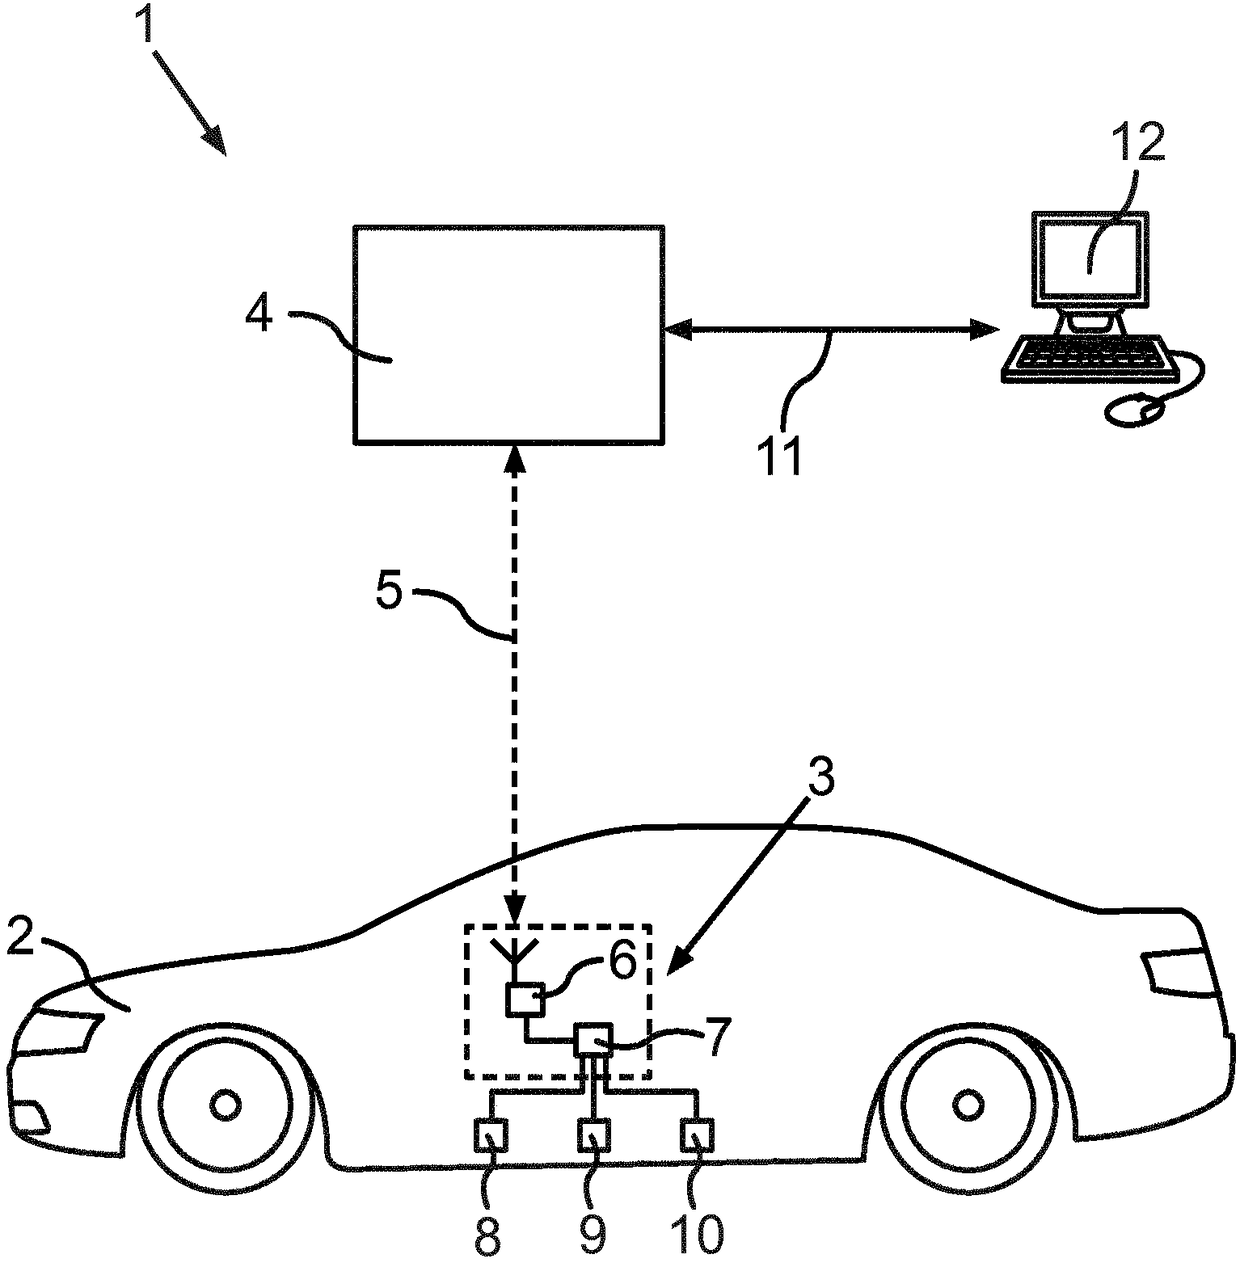 Resetting controller settings in a motor vehicle